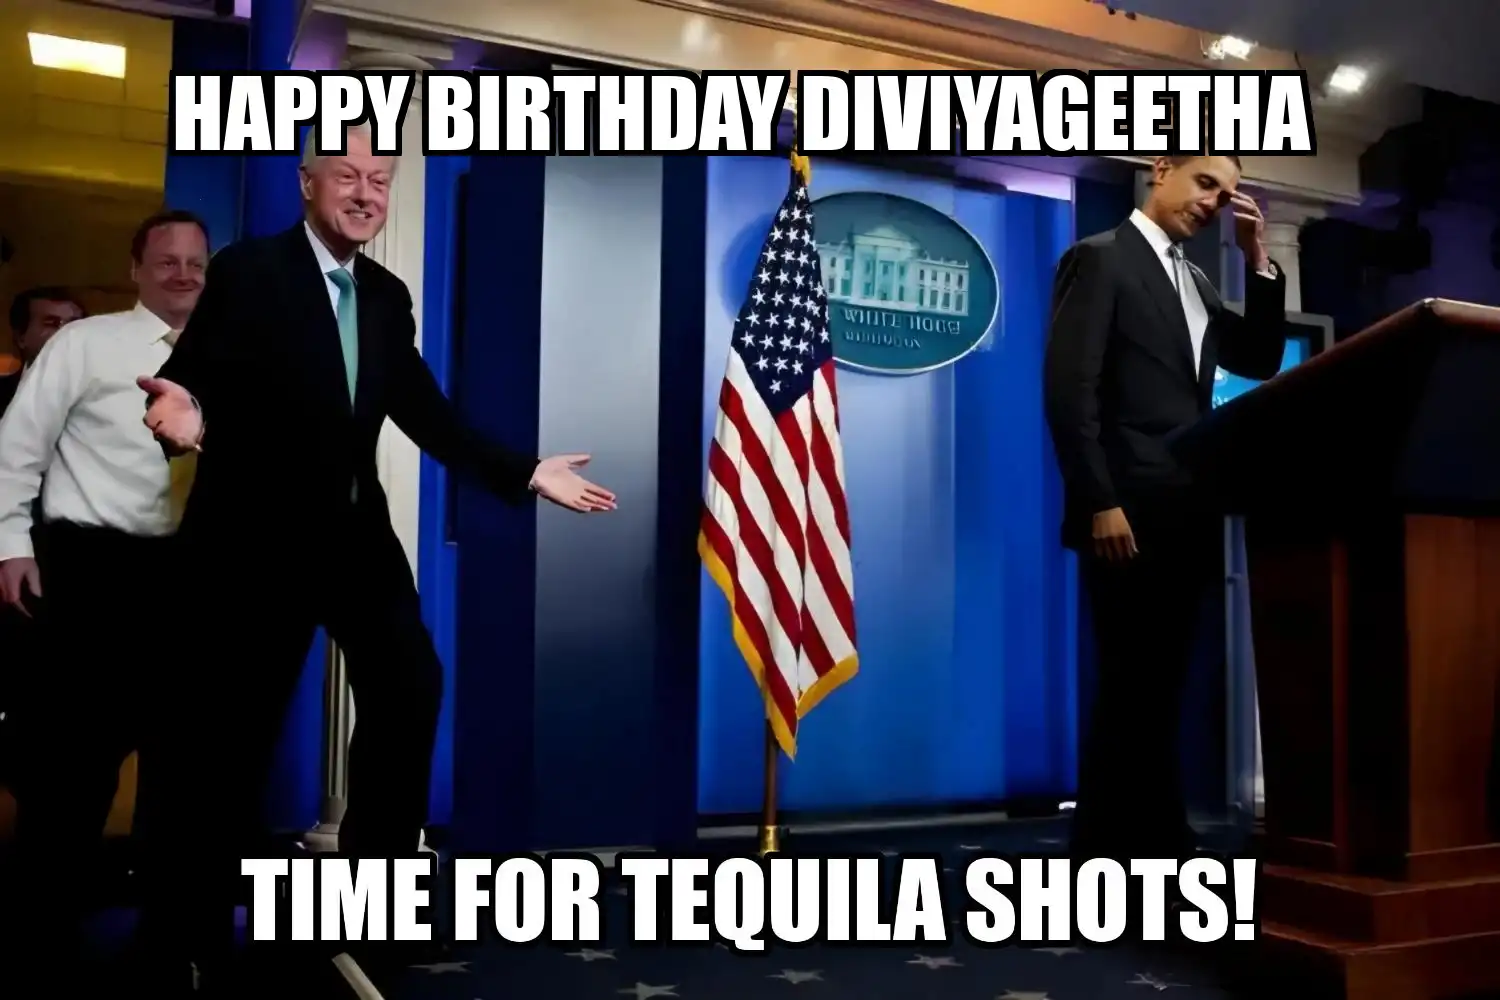 Happy Birthday Diviyageetha Time For Tequila Shots Memes